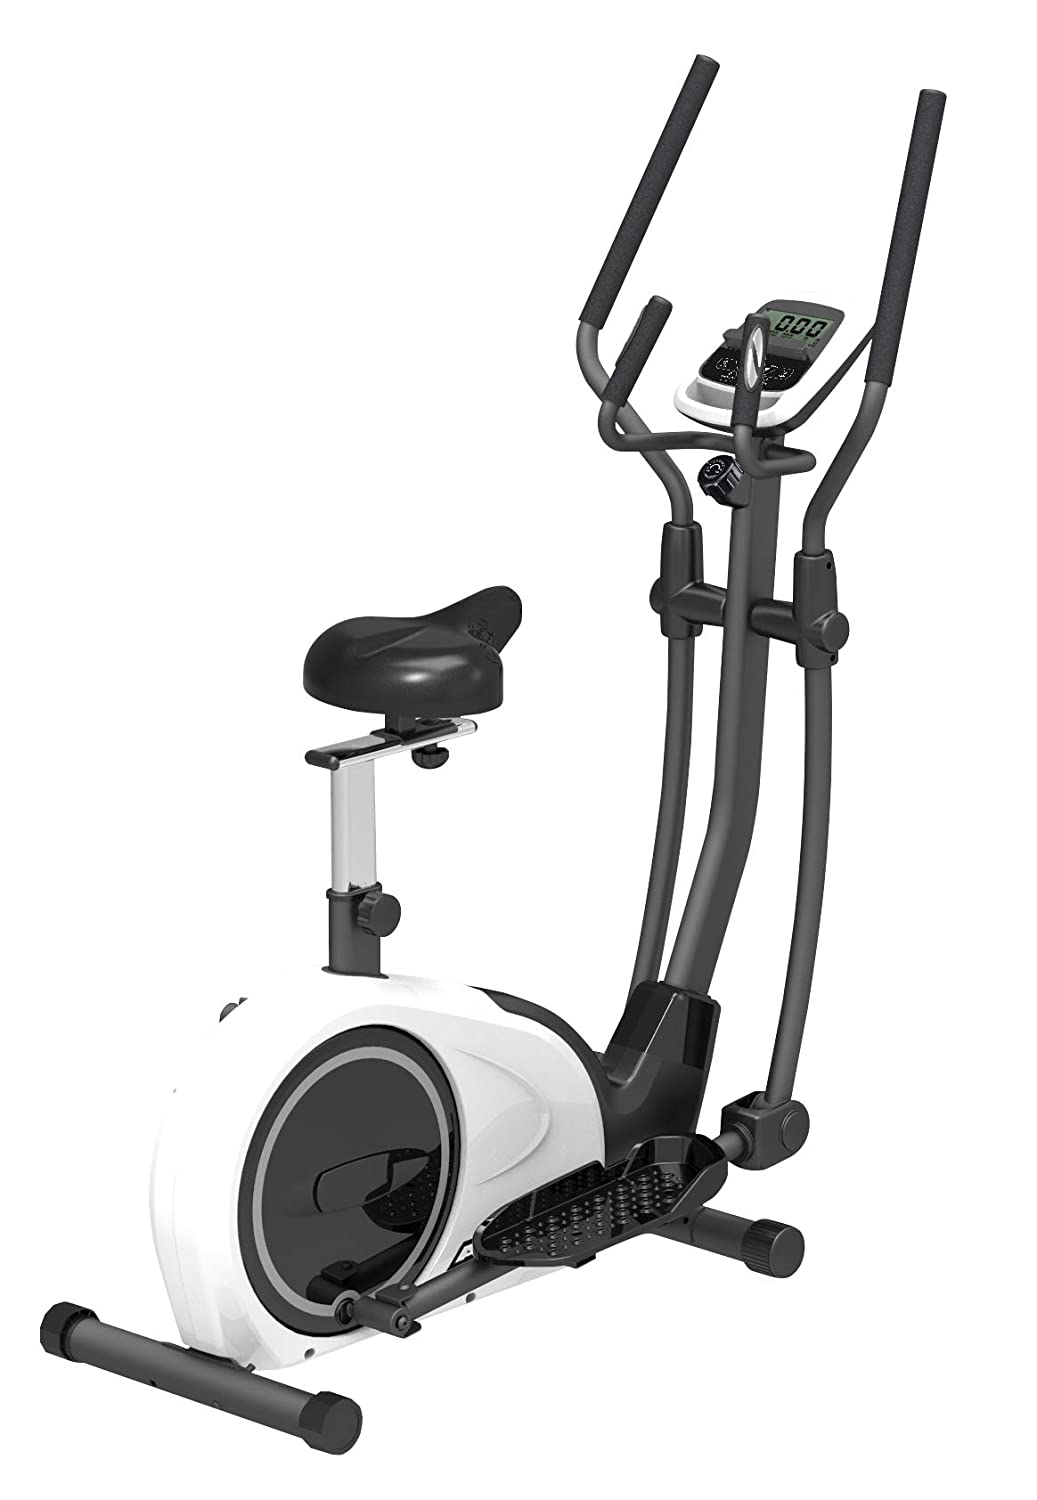 AFTON FX-100 Elliptical Trainer Review India